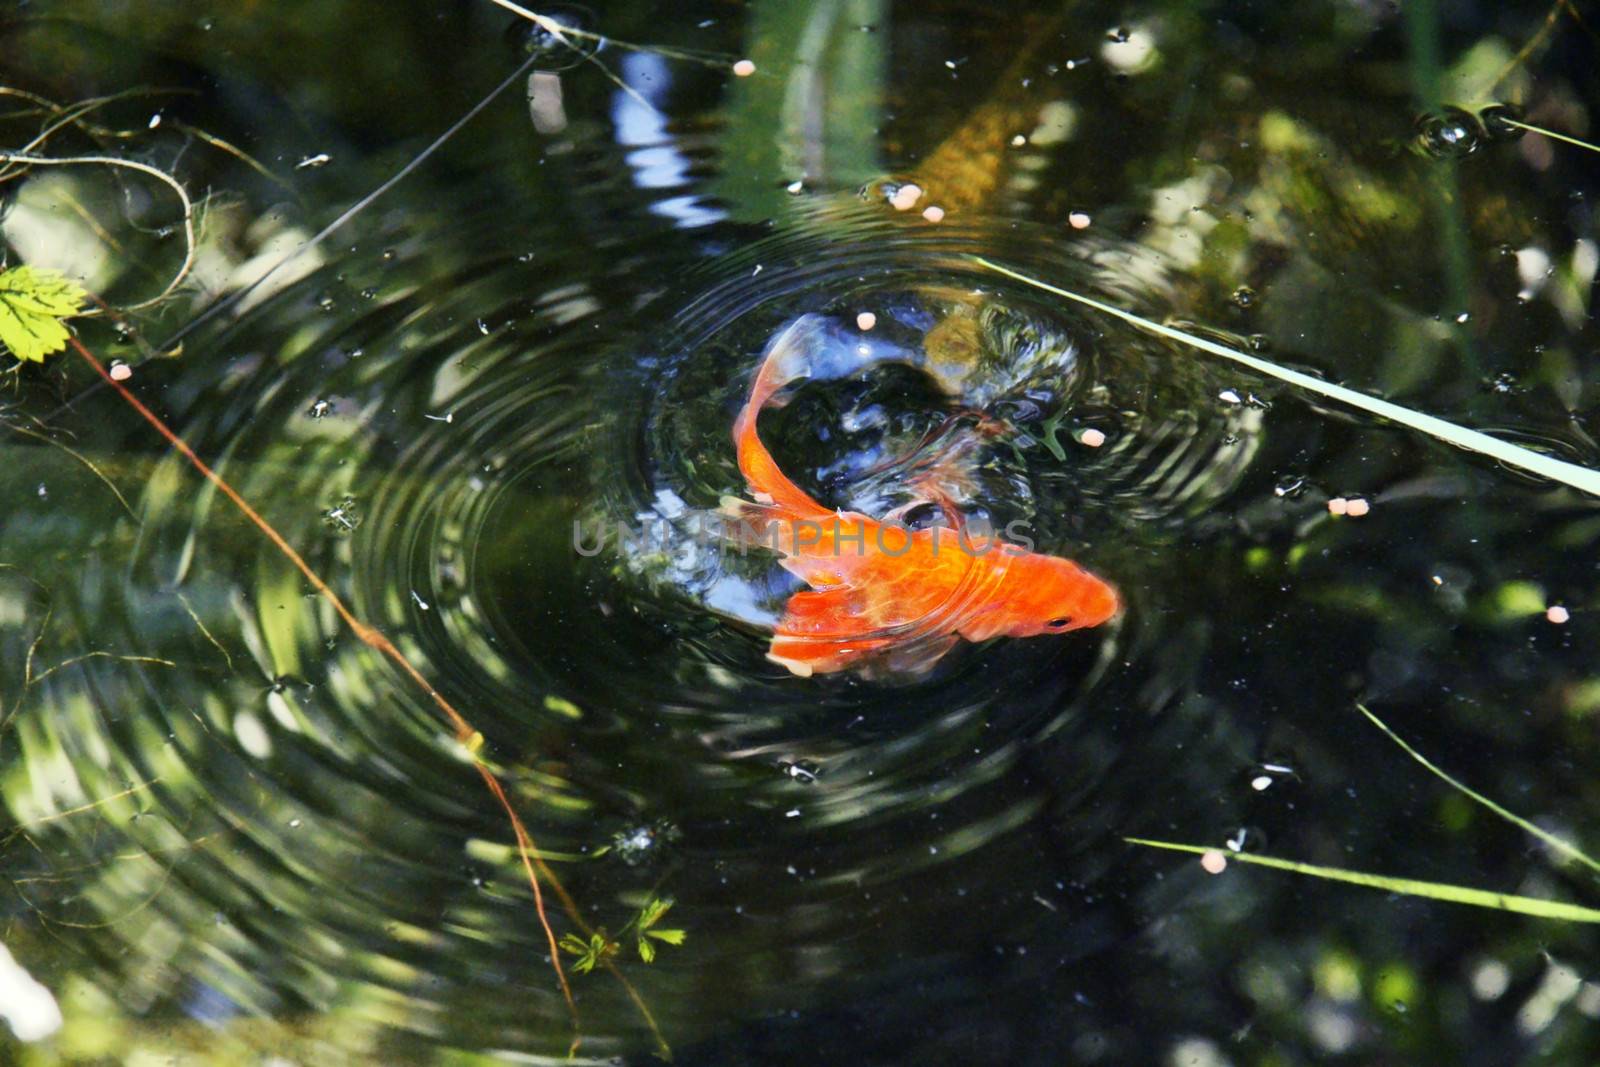 Artistic goldfish at the surface of a pond